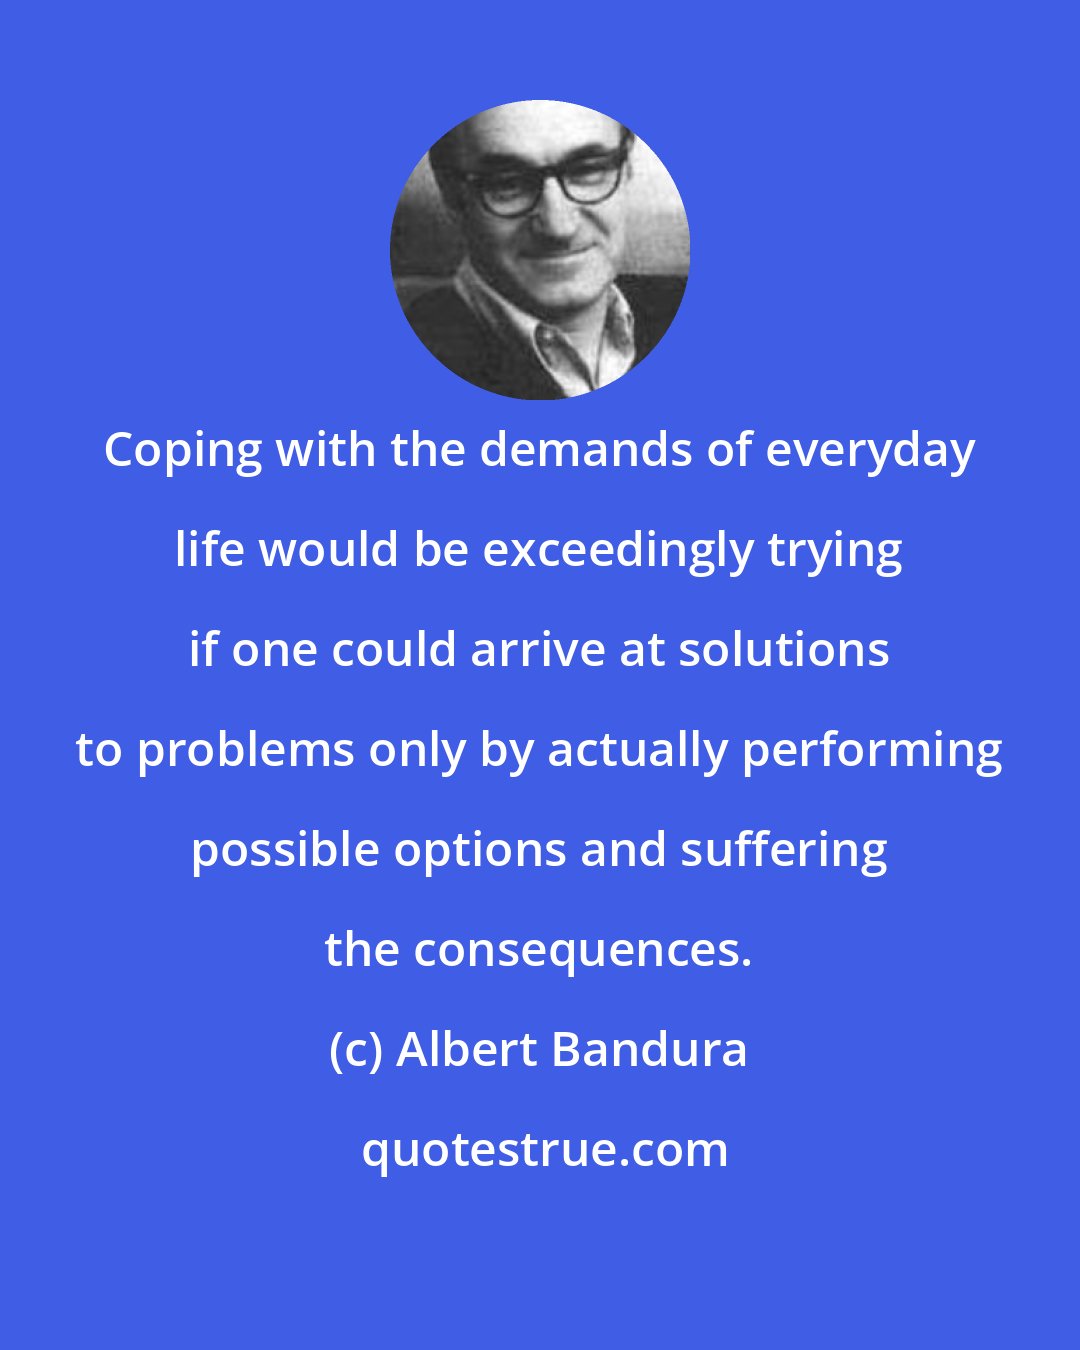 Albert Bandura: Coping with the demands of everyday life would be exceedingly trying if one could arrive at solutions to problems only by actually performing possible options and suffering the consequences.